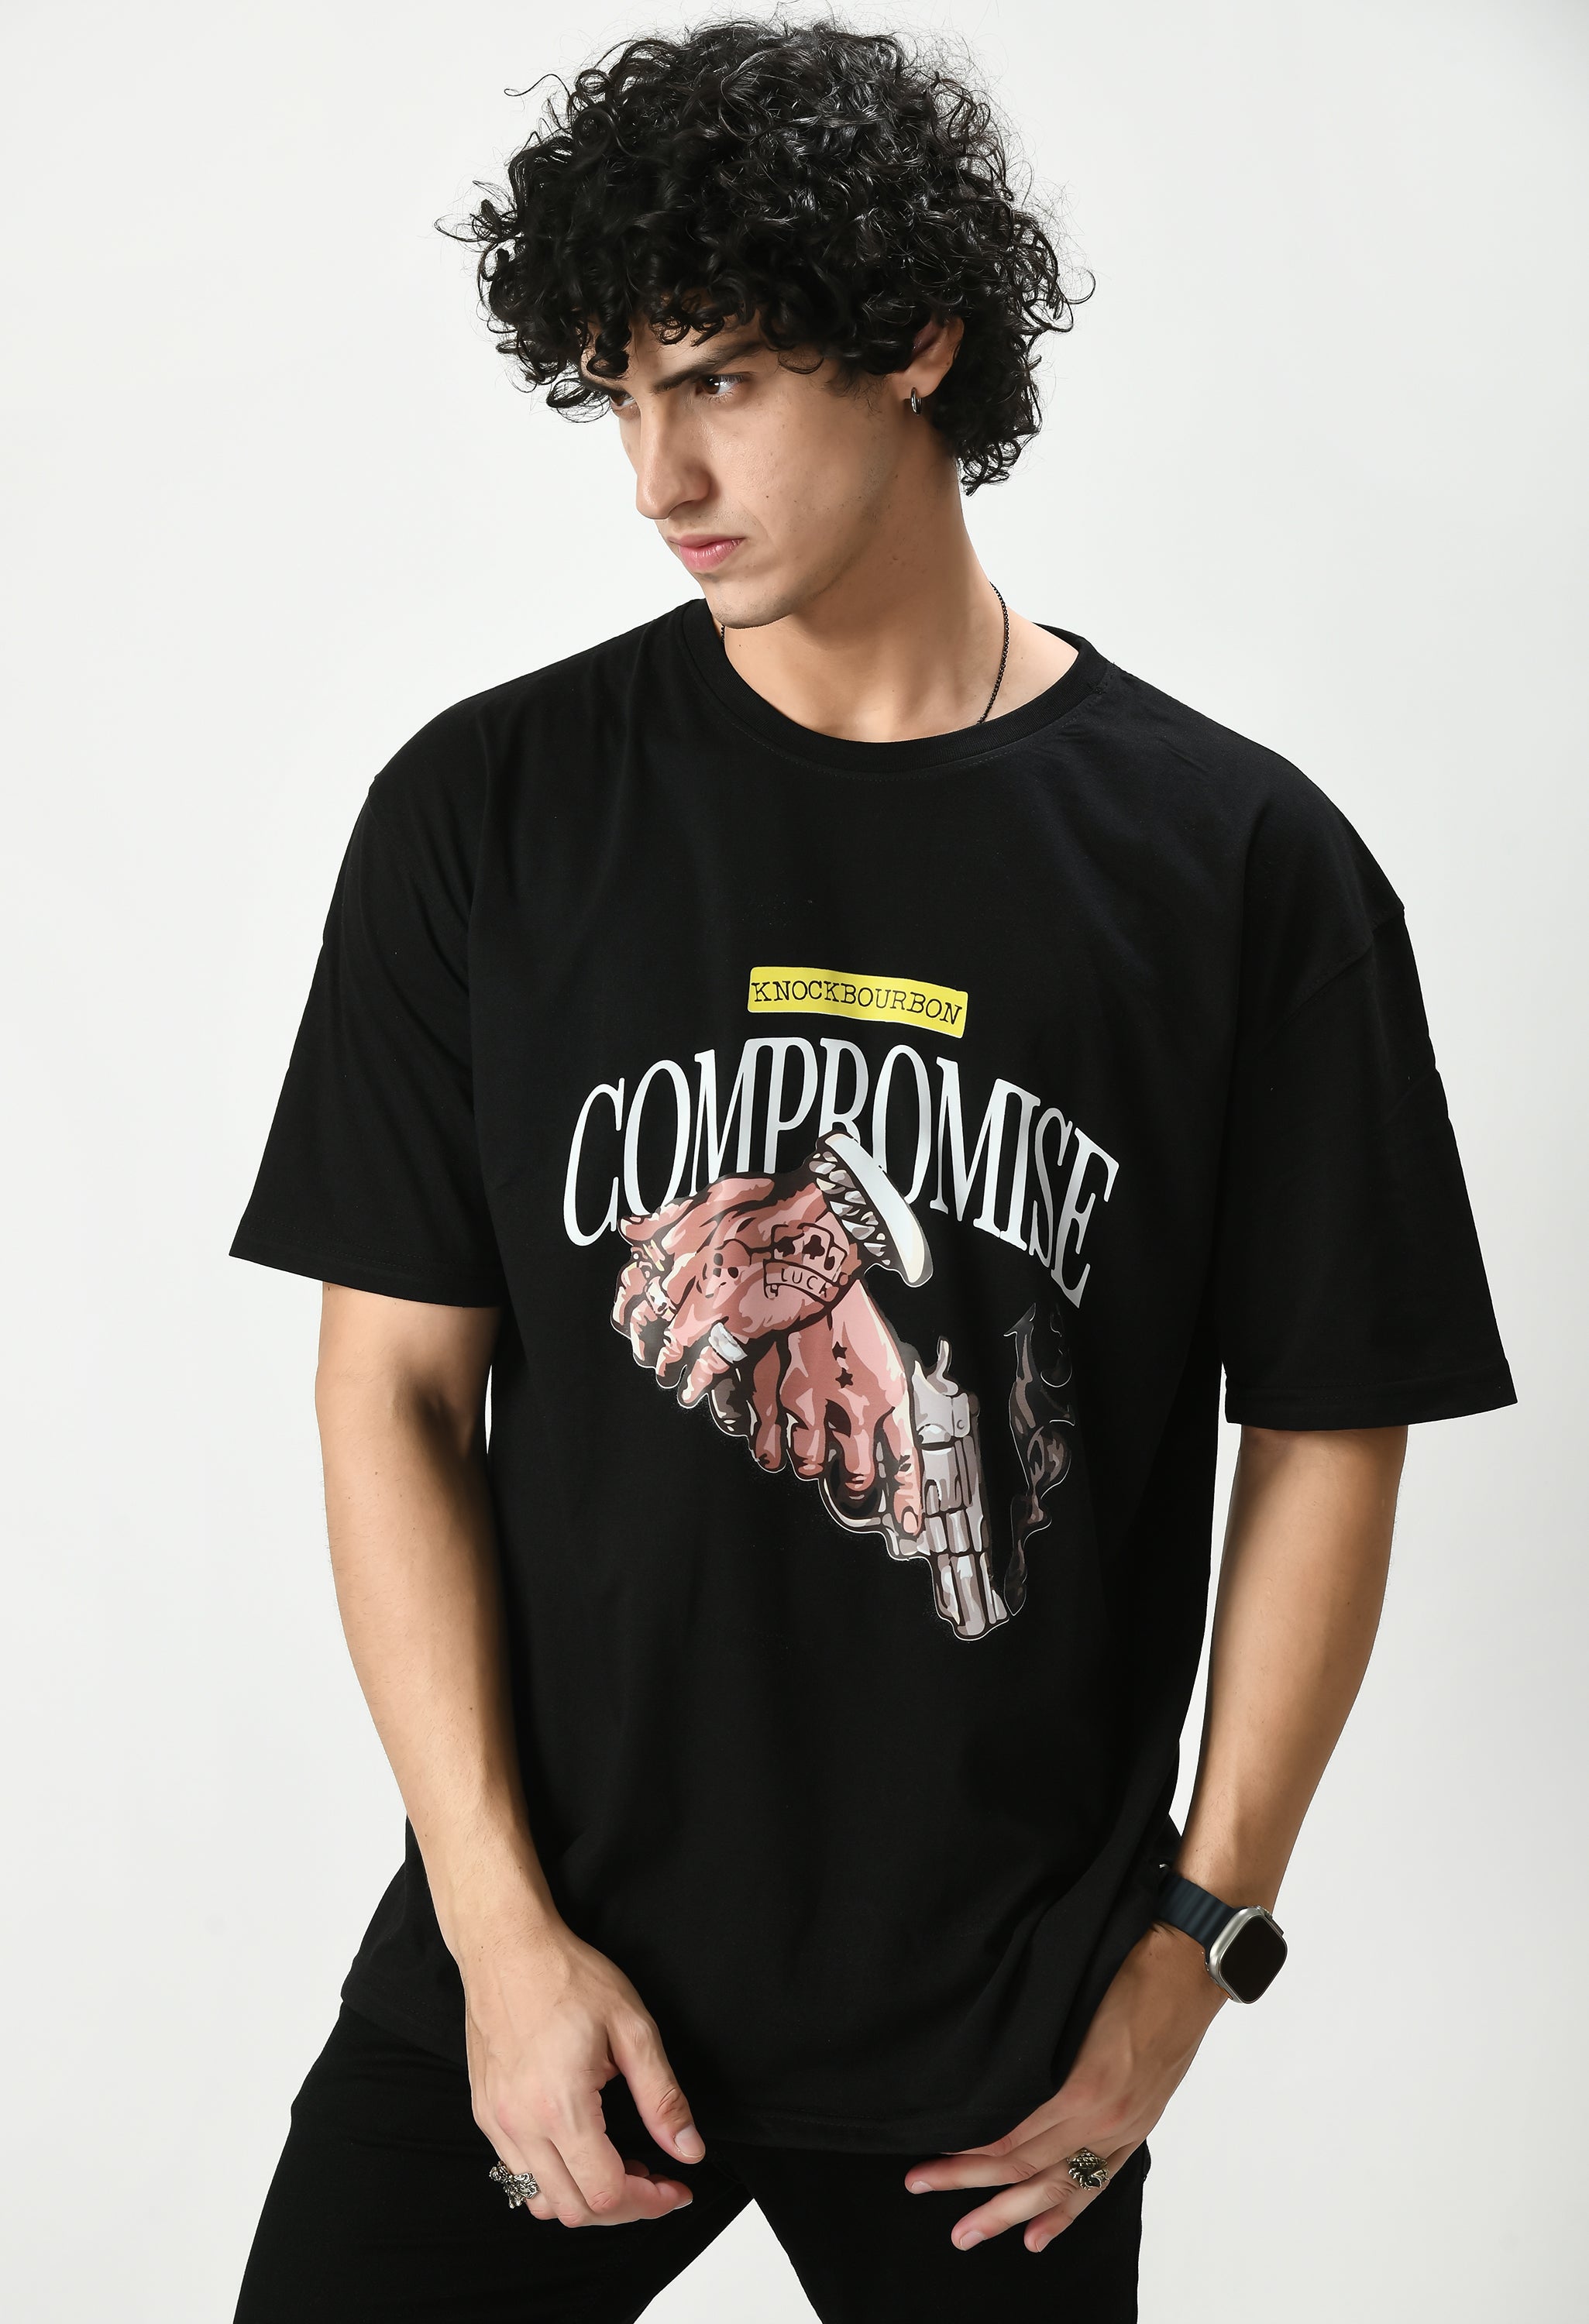 Compromise Graphic Printed Oversized T-shirt By Knock Bourbon